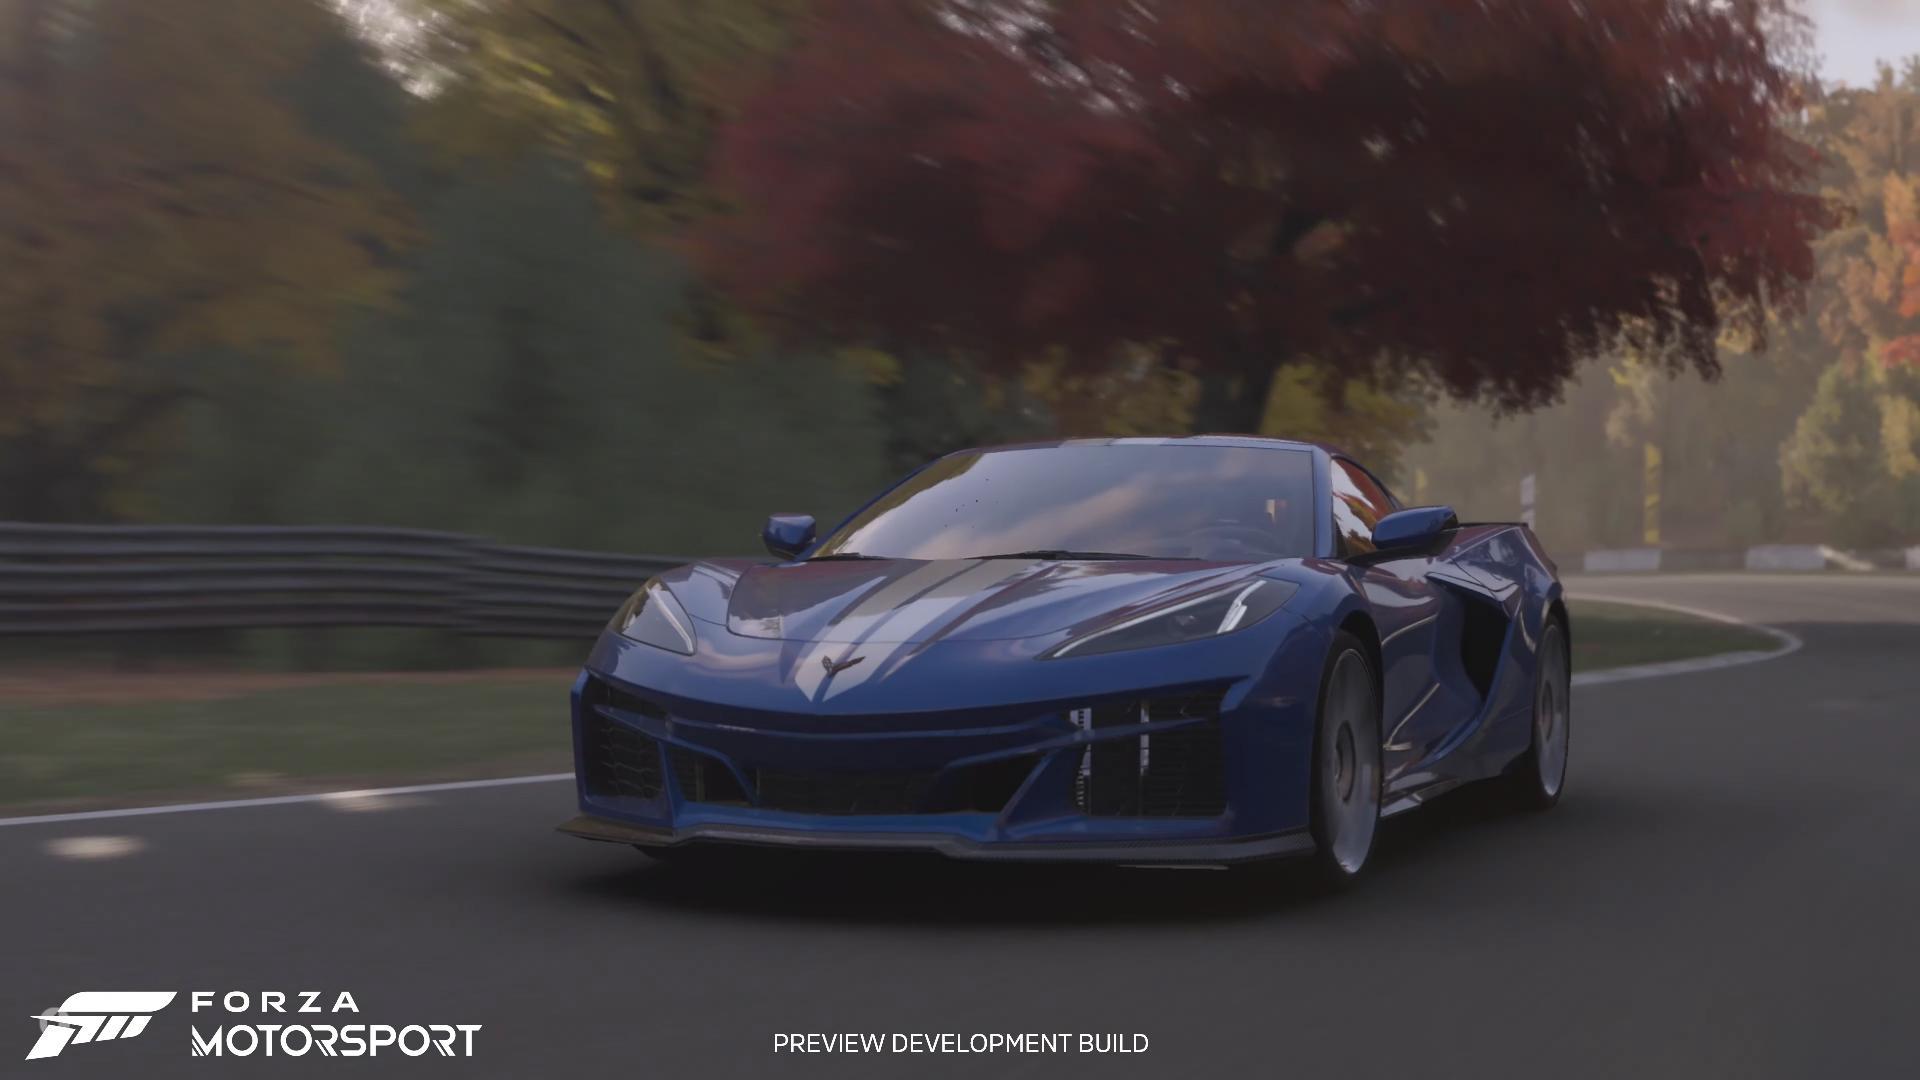 Your New Forza Cover Cars Are the Corvette E-Ray and Cadillac Le Mans  Prototype